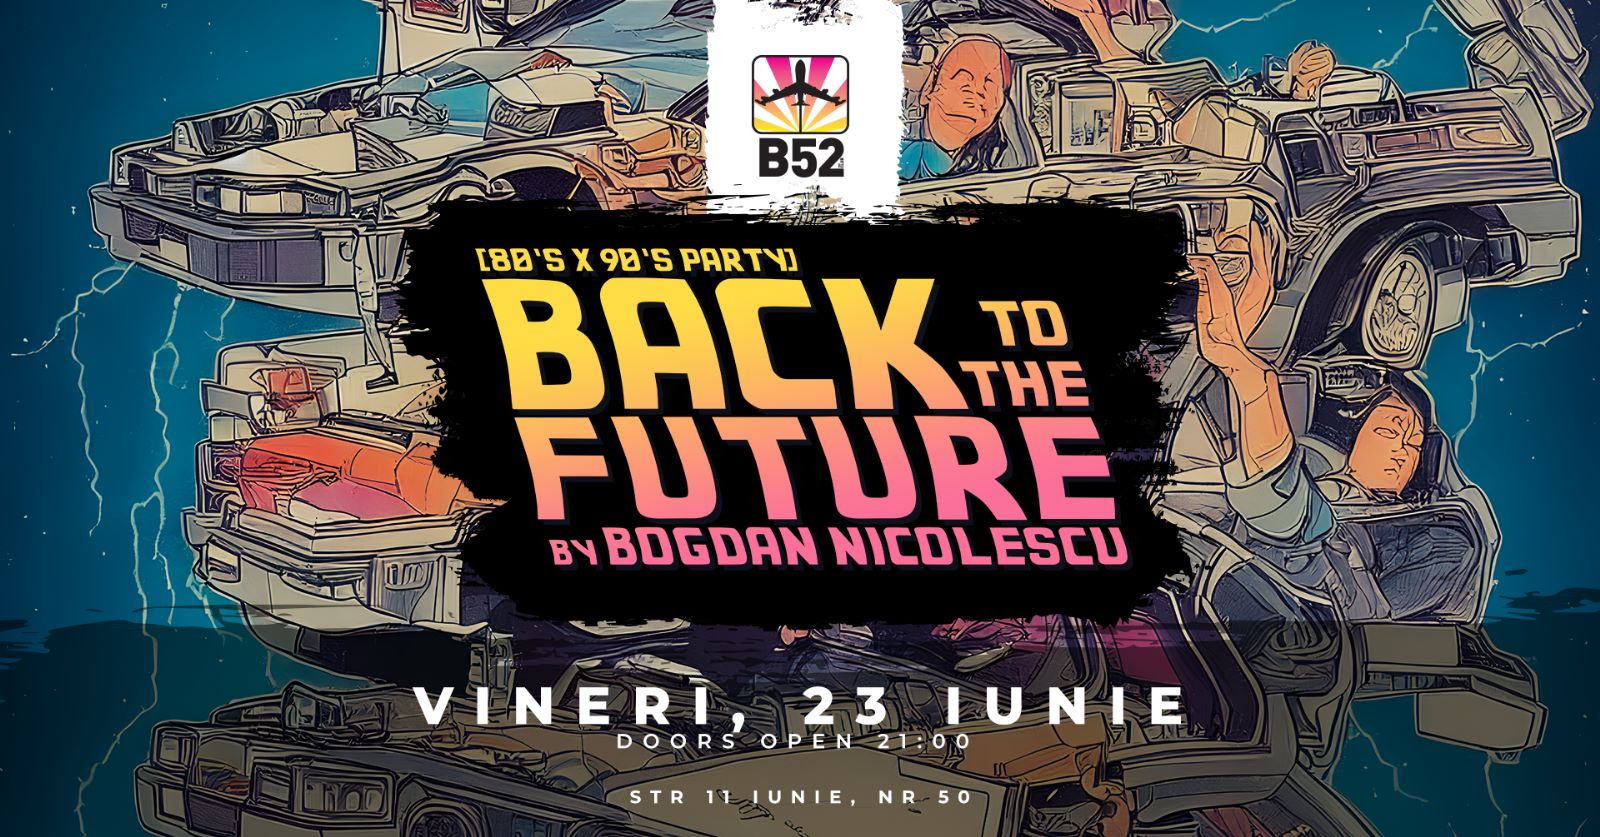 Back To The Future (80's & 90's Party) by Bogdan